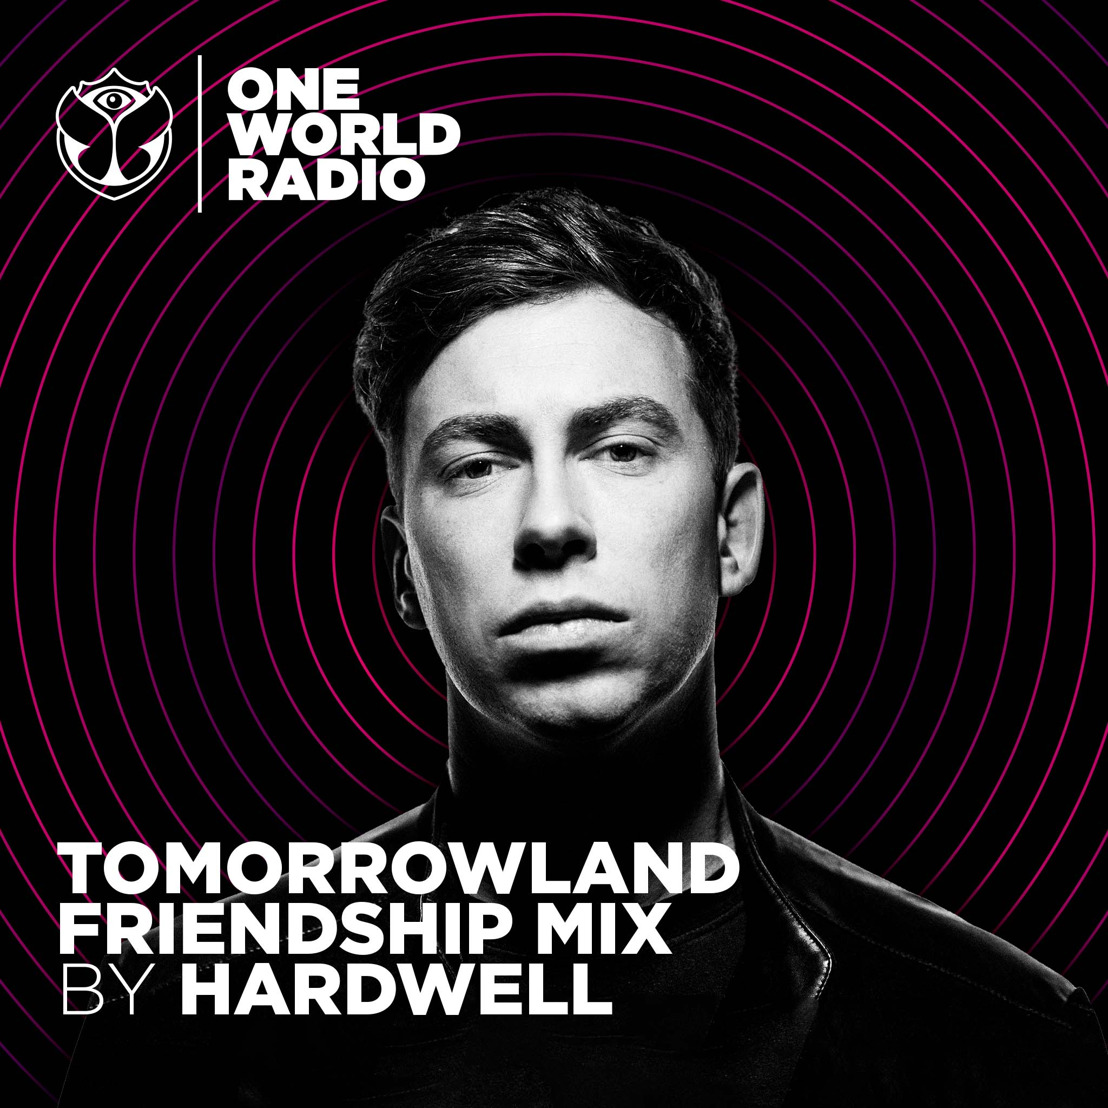 One World Radio welcomes Hardwell for his first ever Tomorrowland Friendship Mix